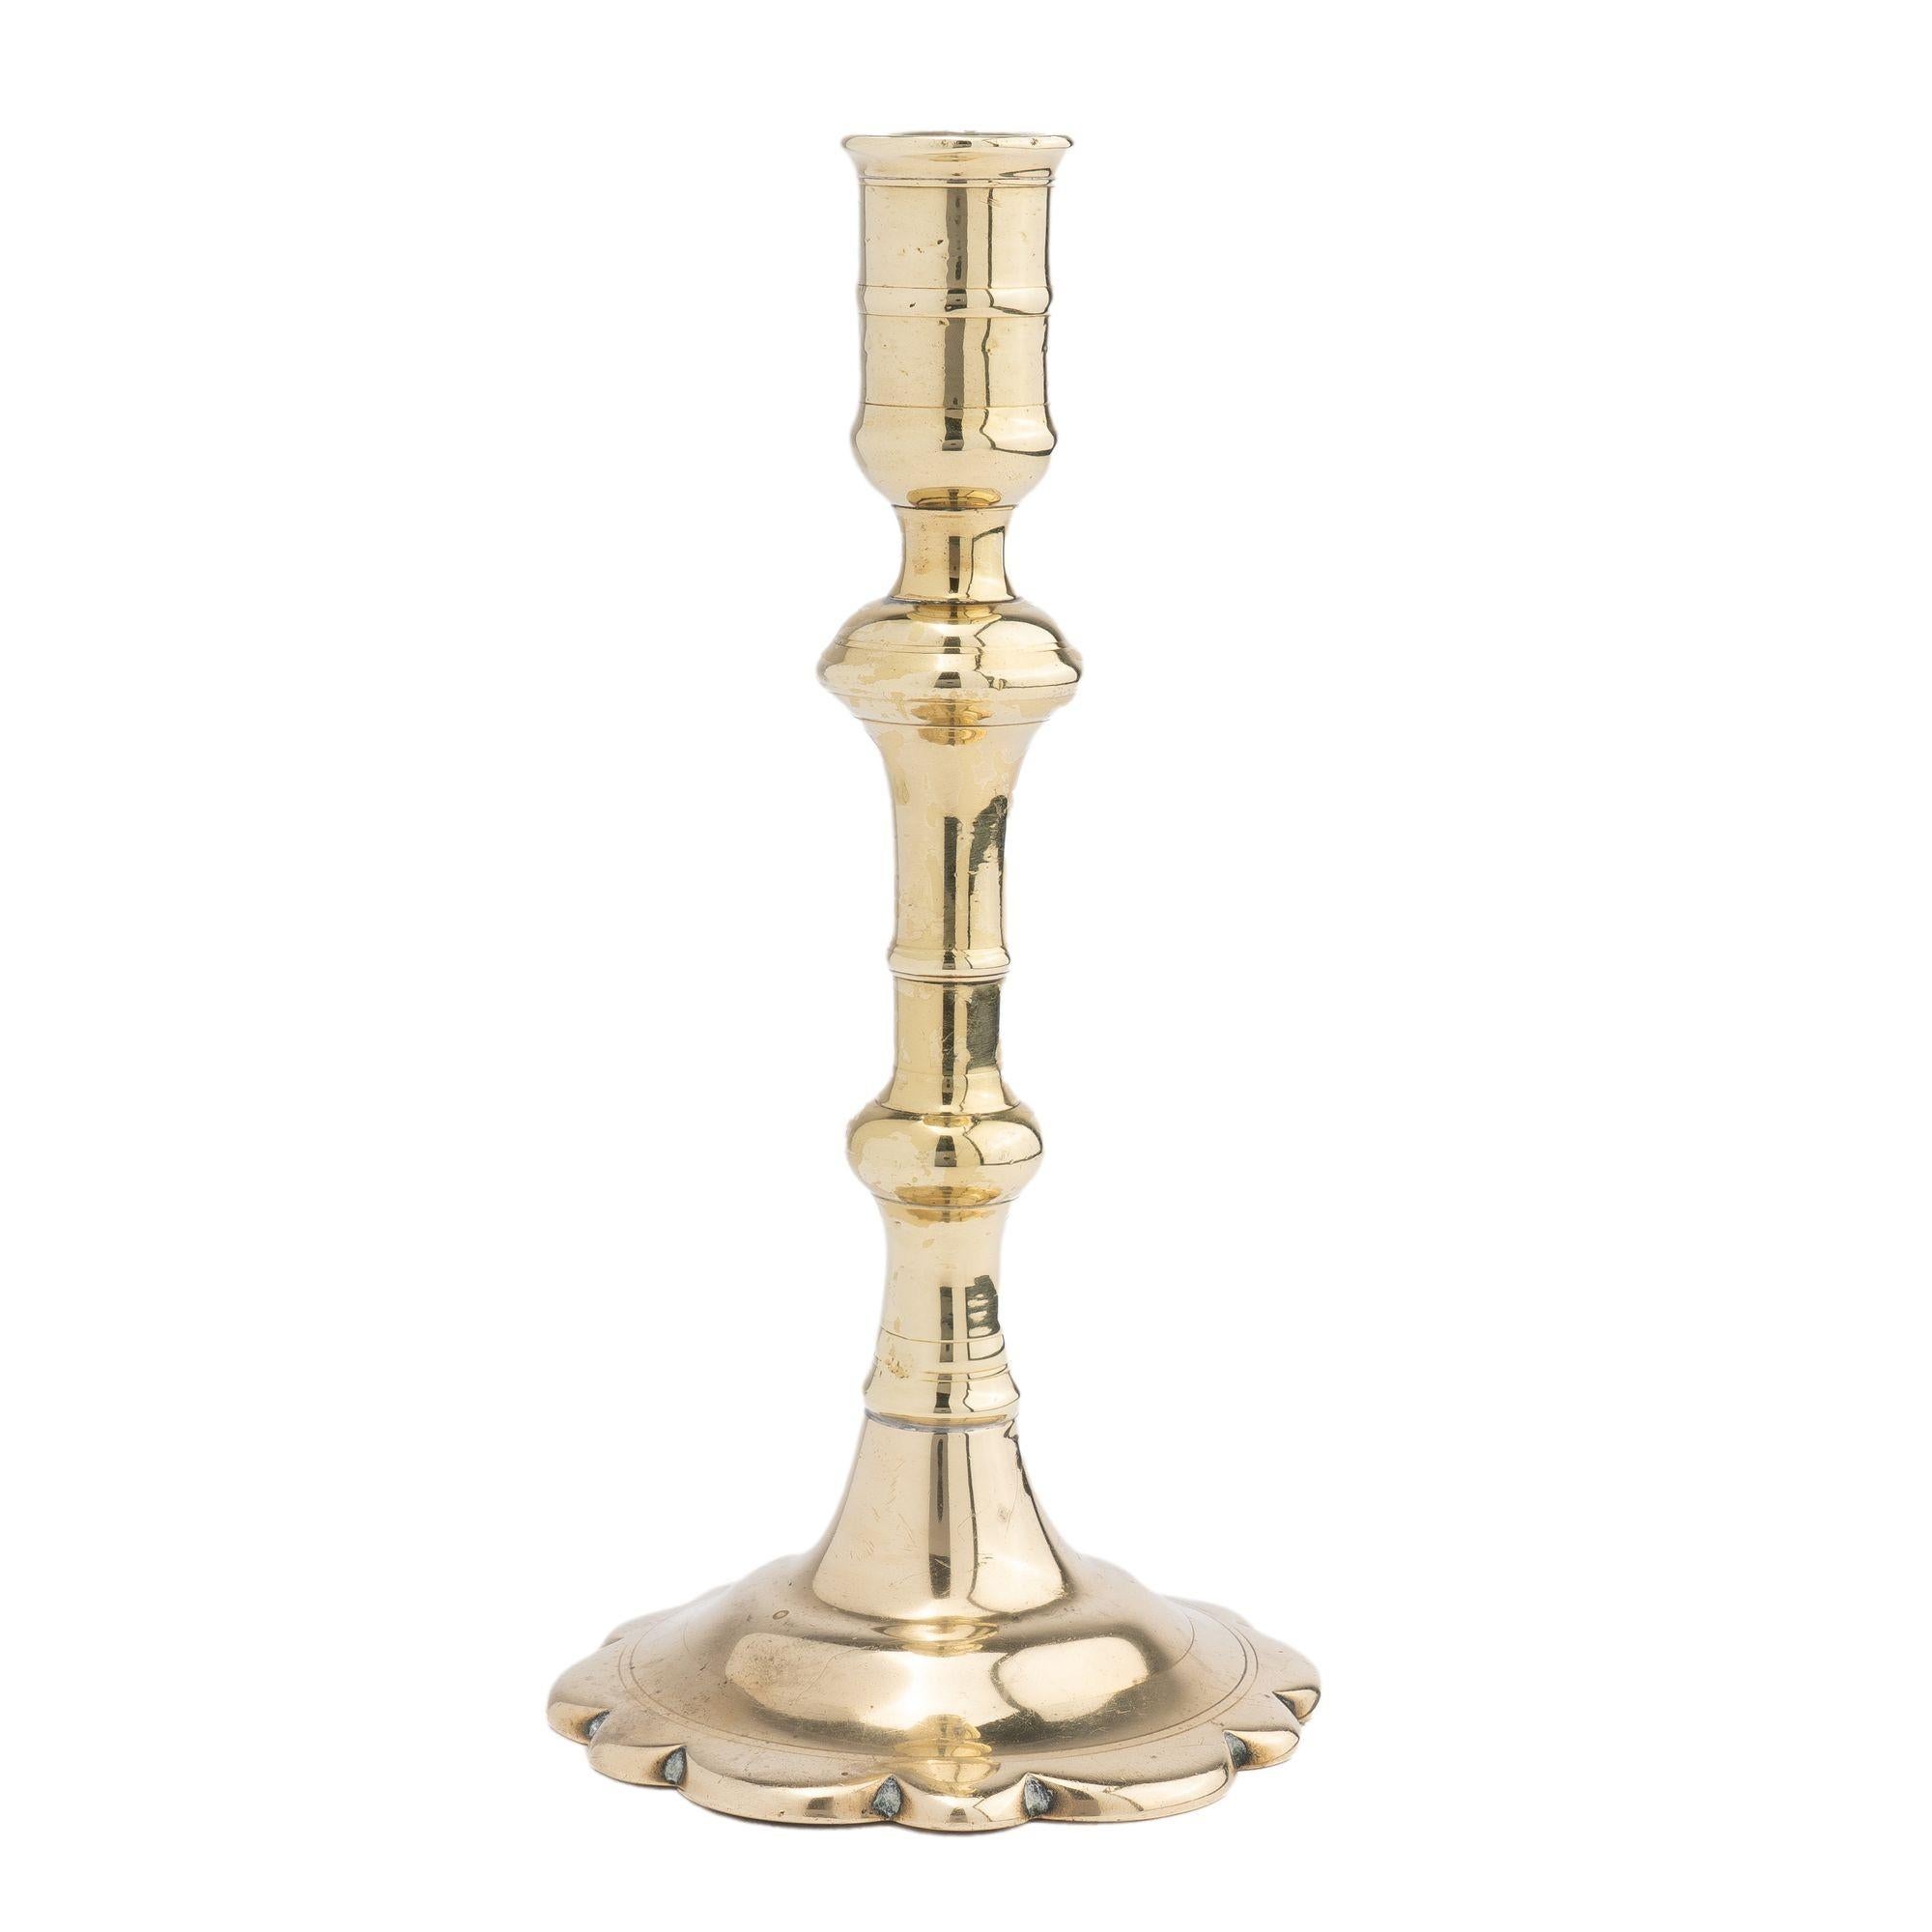 Seam cast brass Queen Anne candlestick with urn form candle cup supported by a trumpet form shaft over a suppressed knob peened to a conical to domed base with scolloped edge. The candle shaft retains its original push up candle